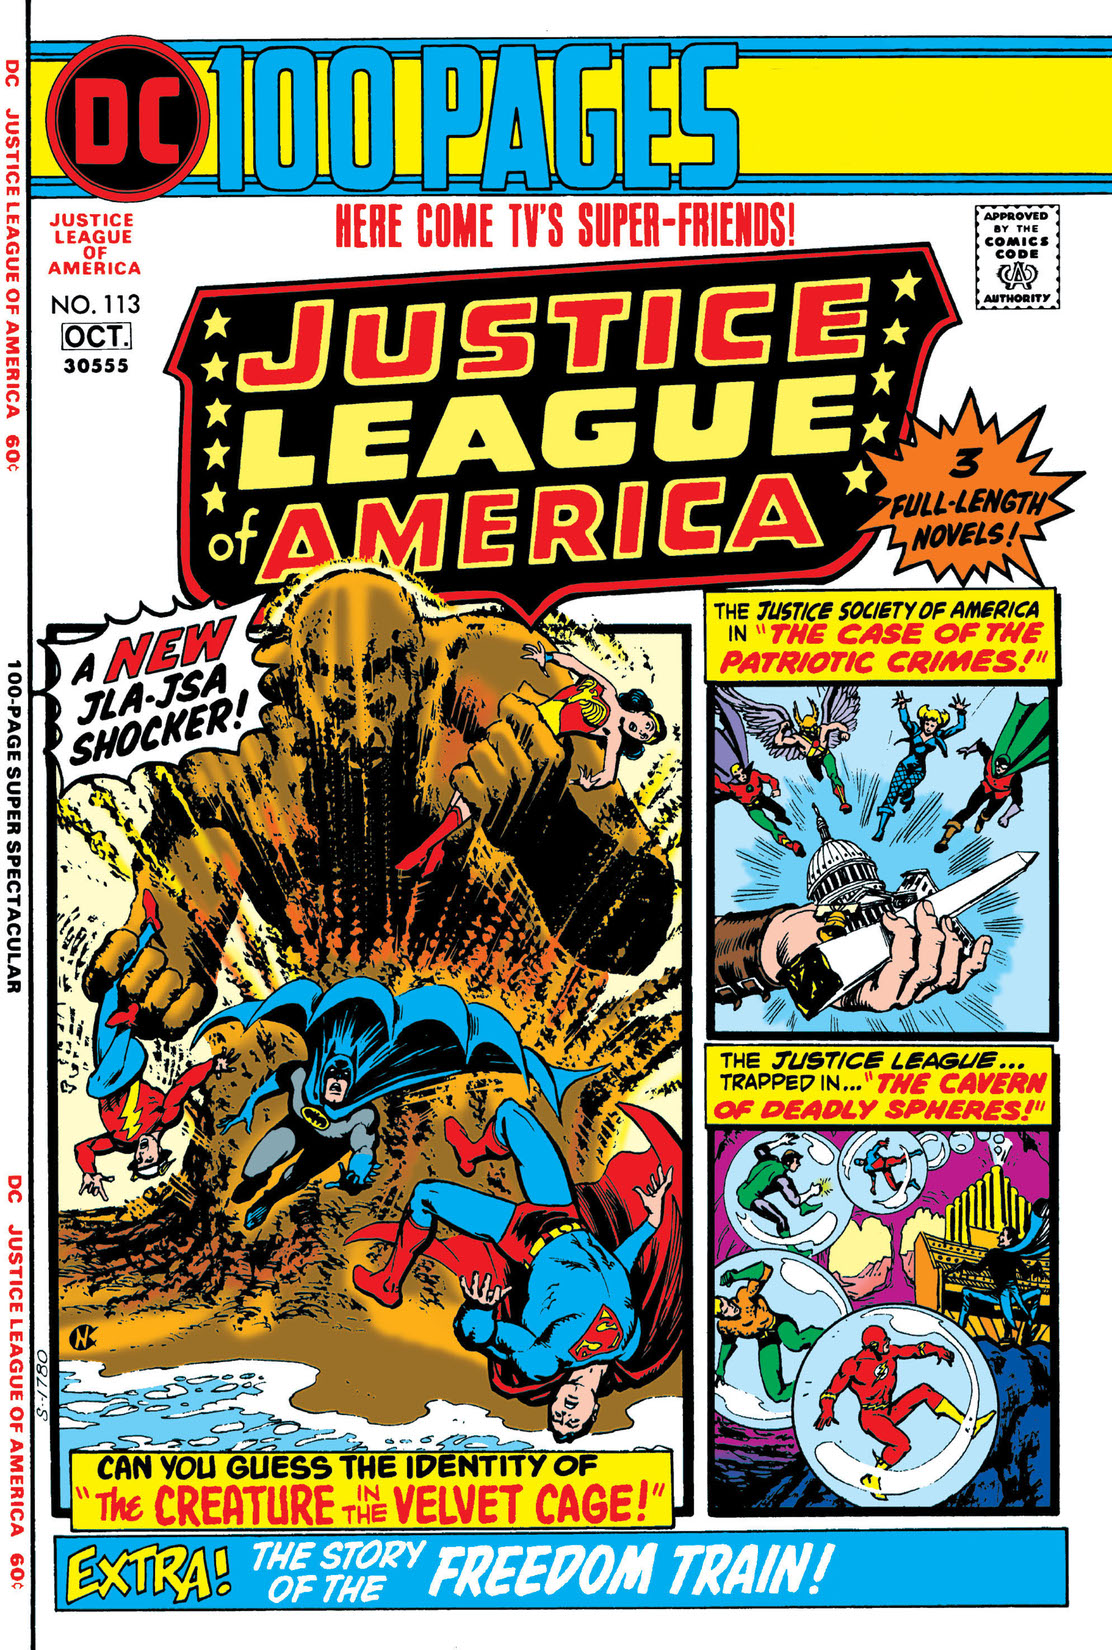 Justice League of America (1960-) #113 preview images